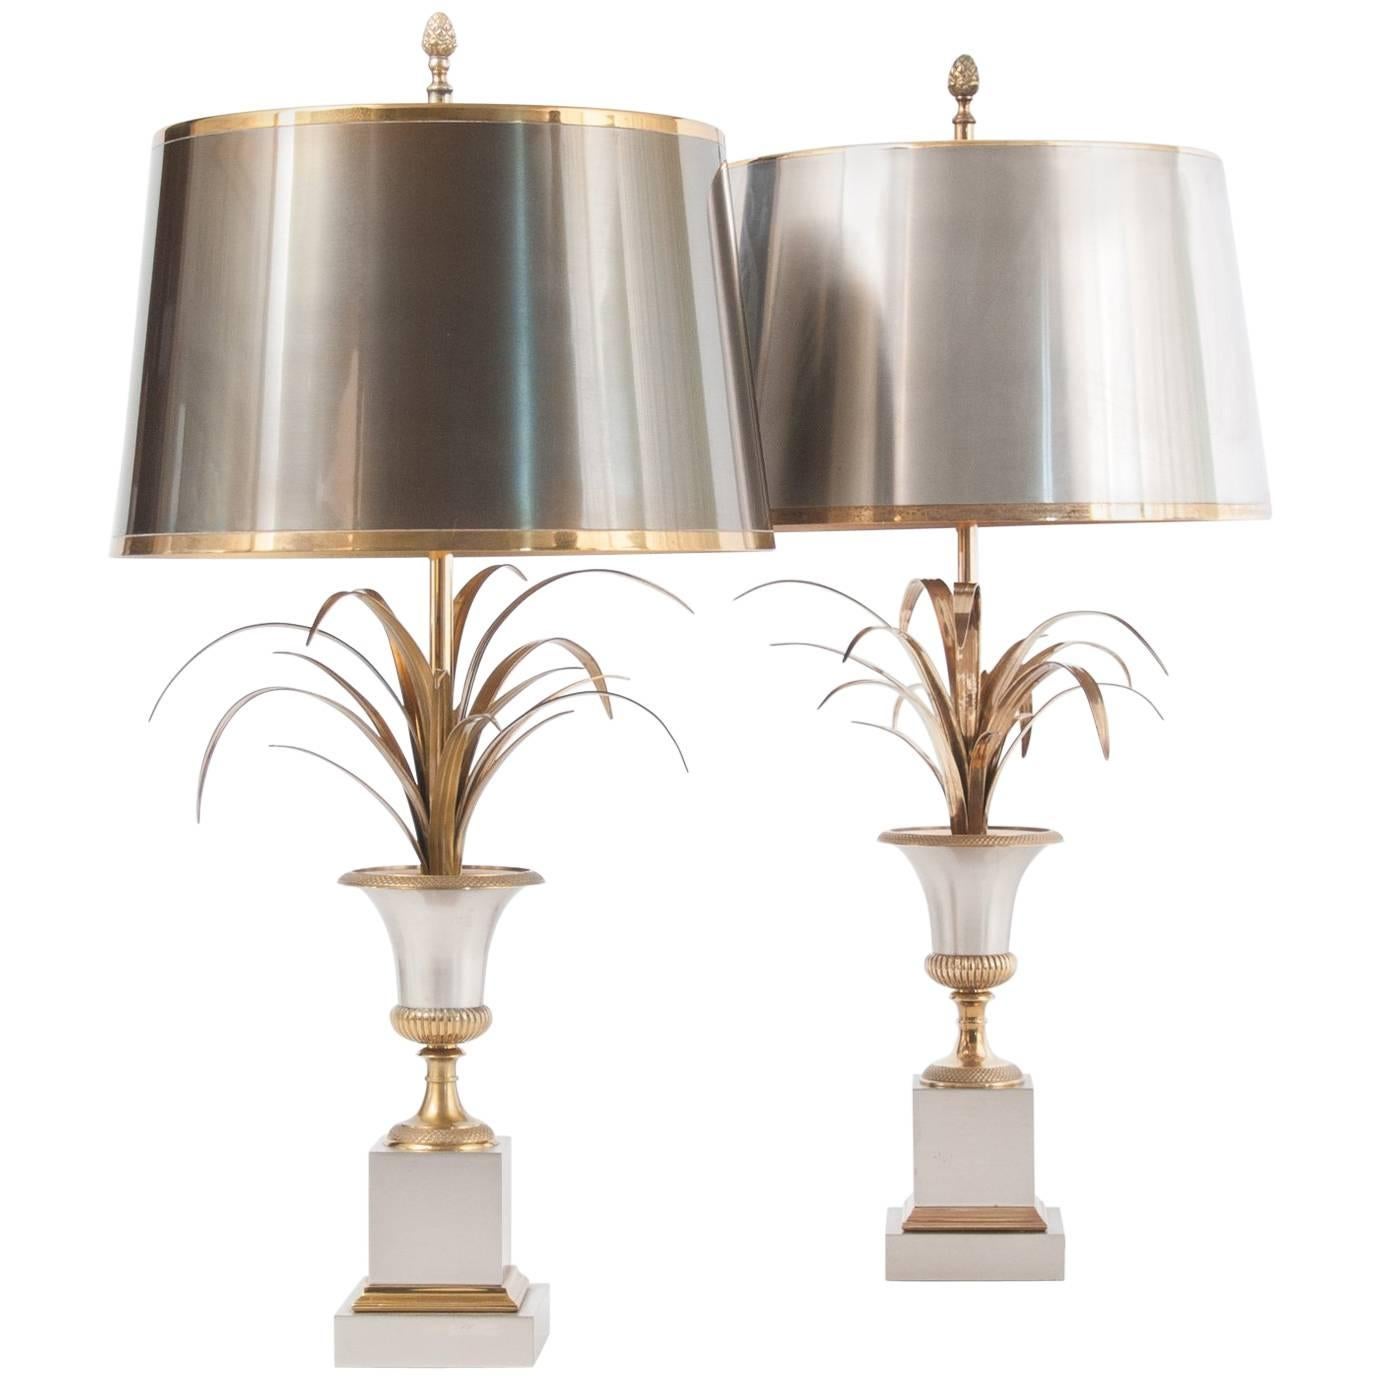 Matched Pair of Hollywood Regency Vase Roseaux Table Lamps by Maison Charles